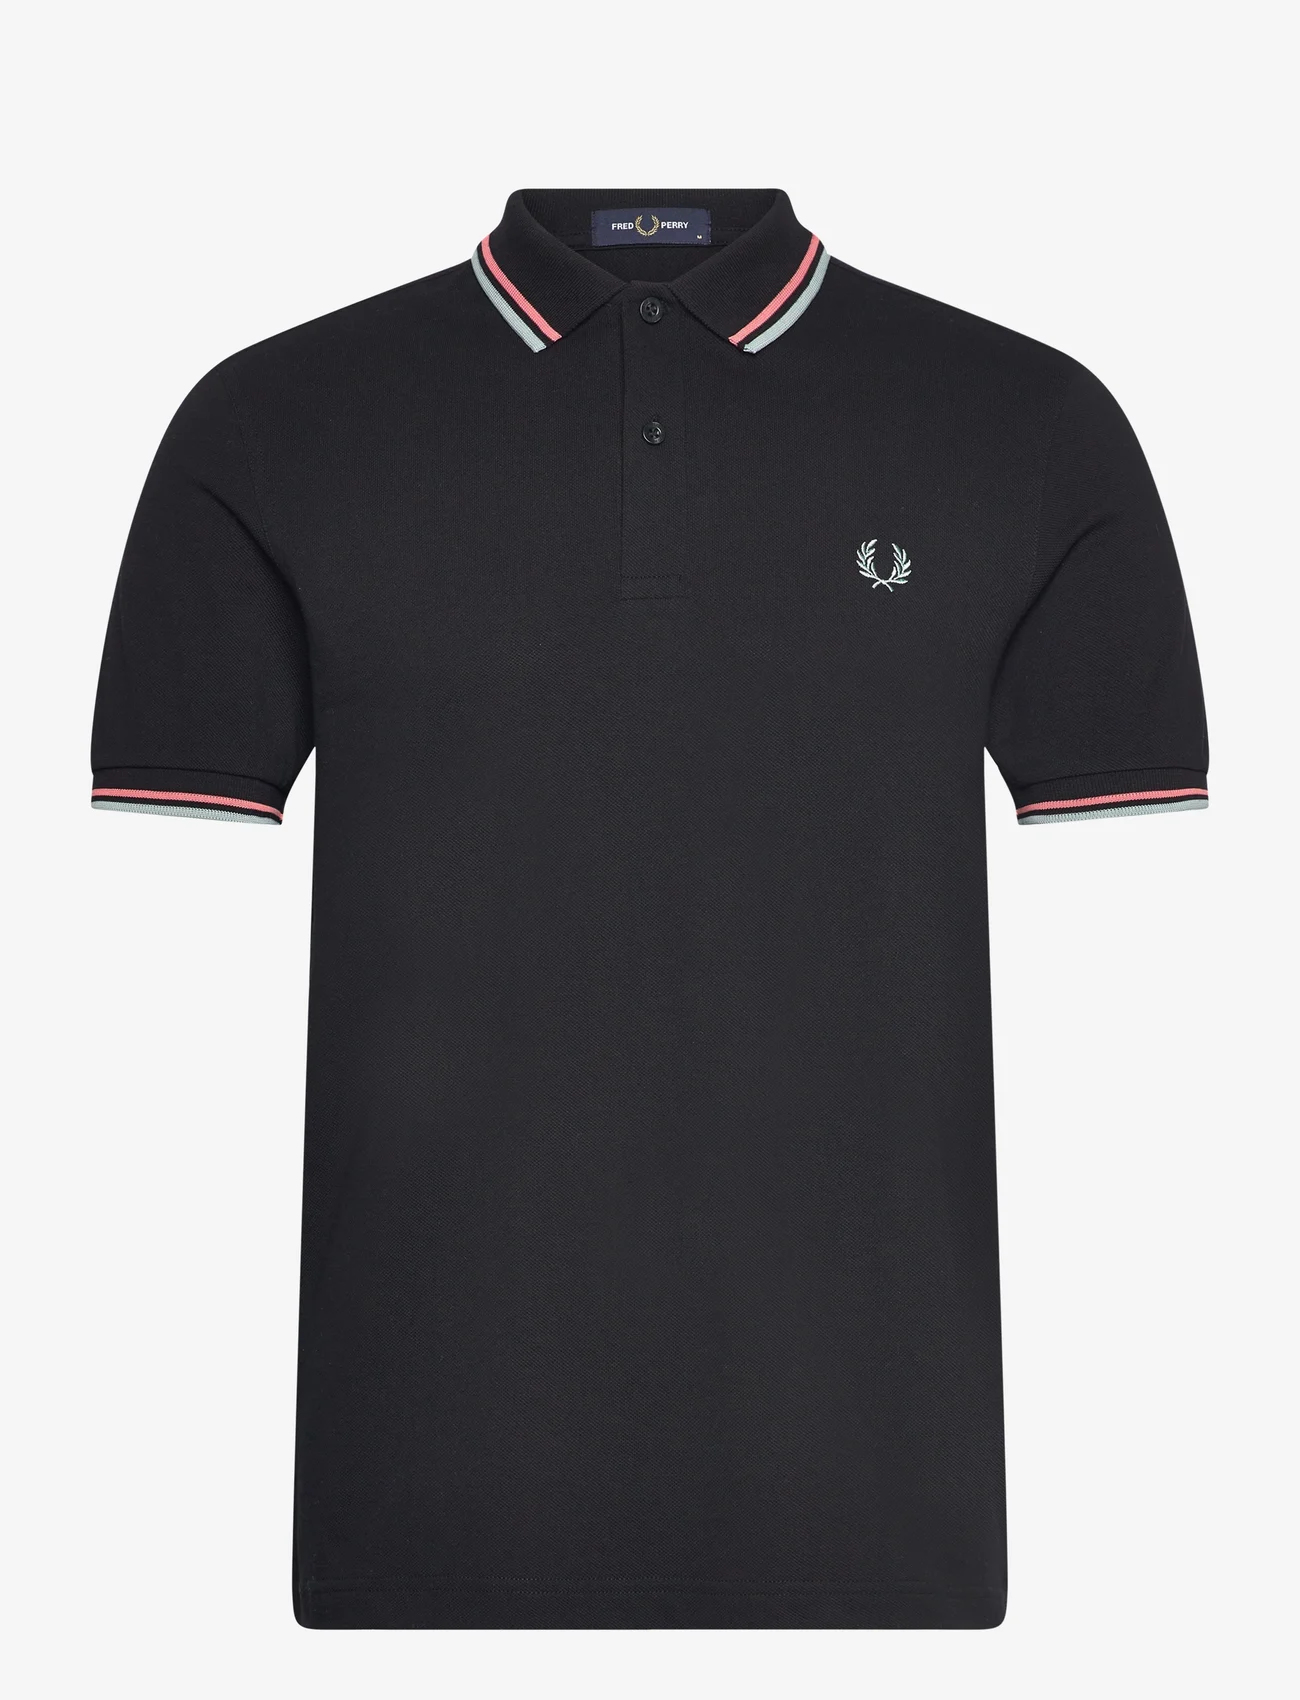 Fred Perry - TWIN TIPPED FP SHIRT - lyhythihaiset - blk/crlhet/slvbl - 0